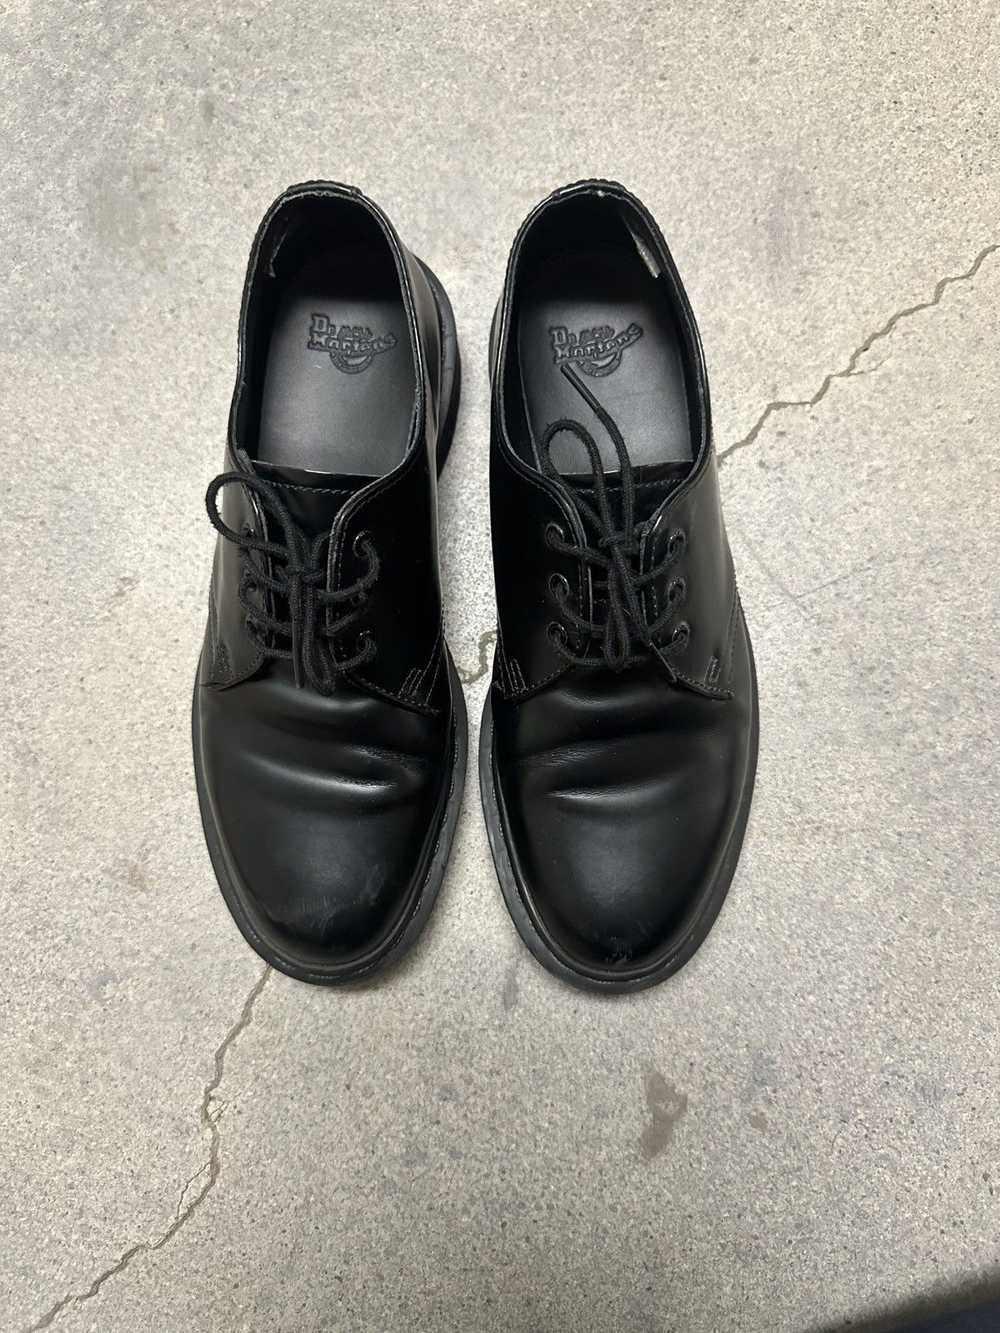 Dr. Martens 1461 Mono Smooth Leather Oxford Size 8 - image 5